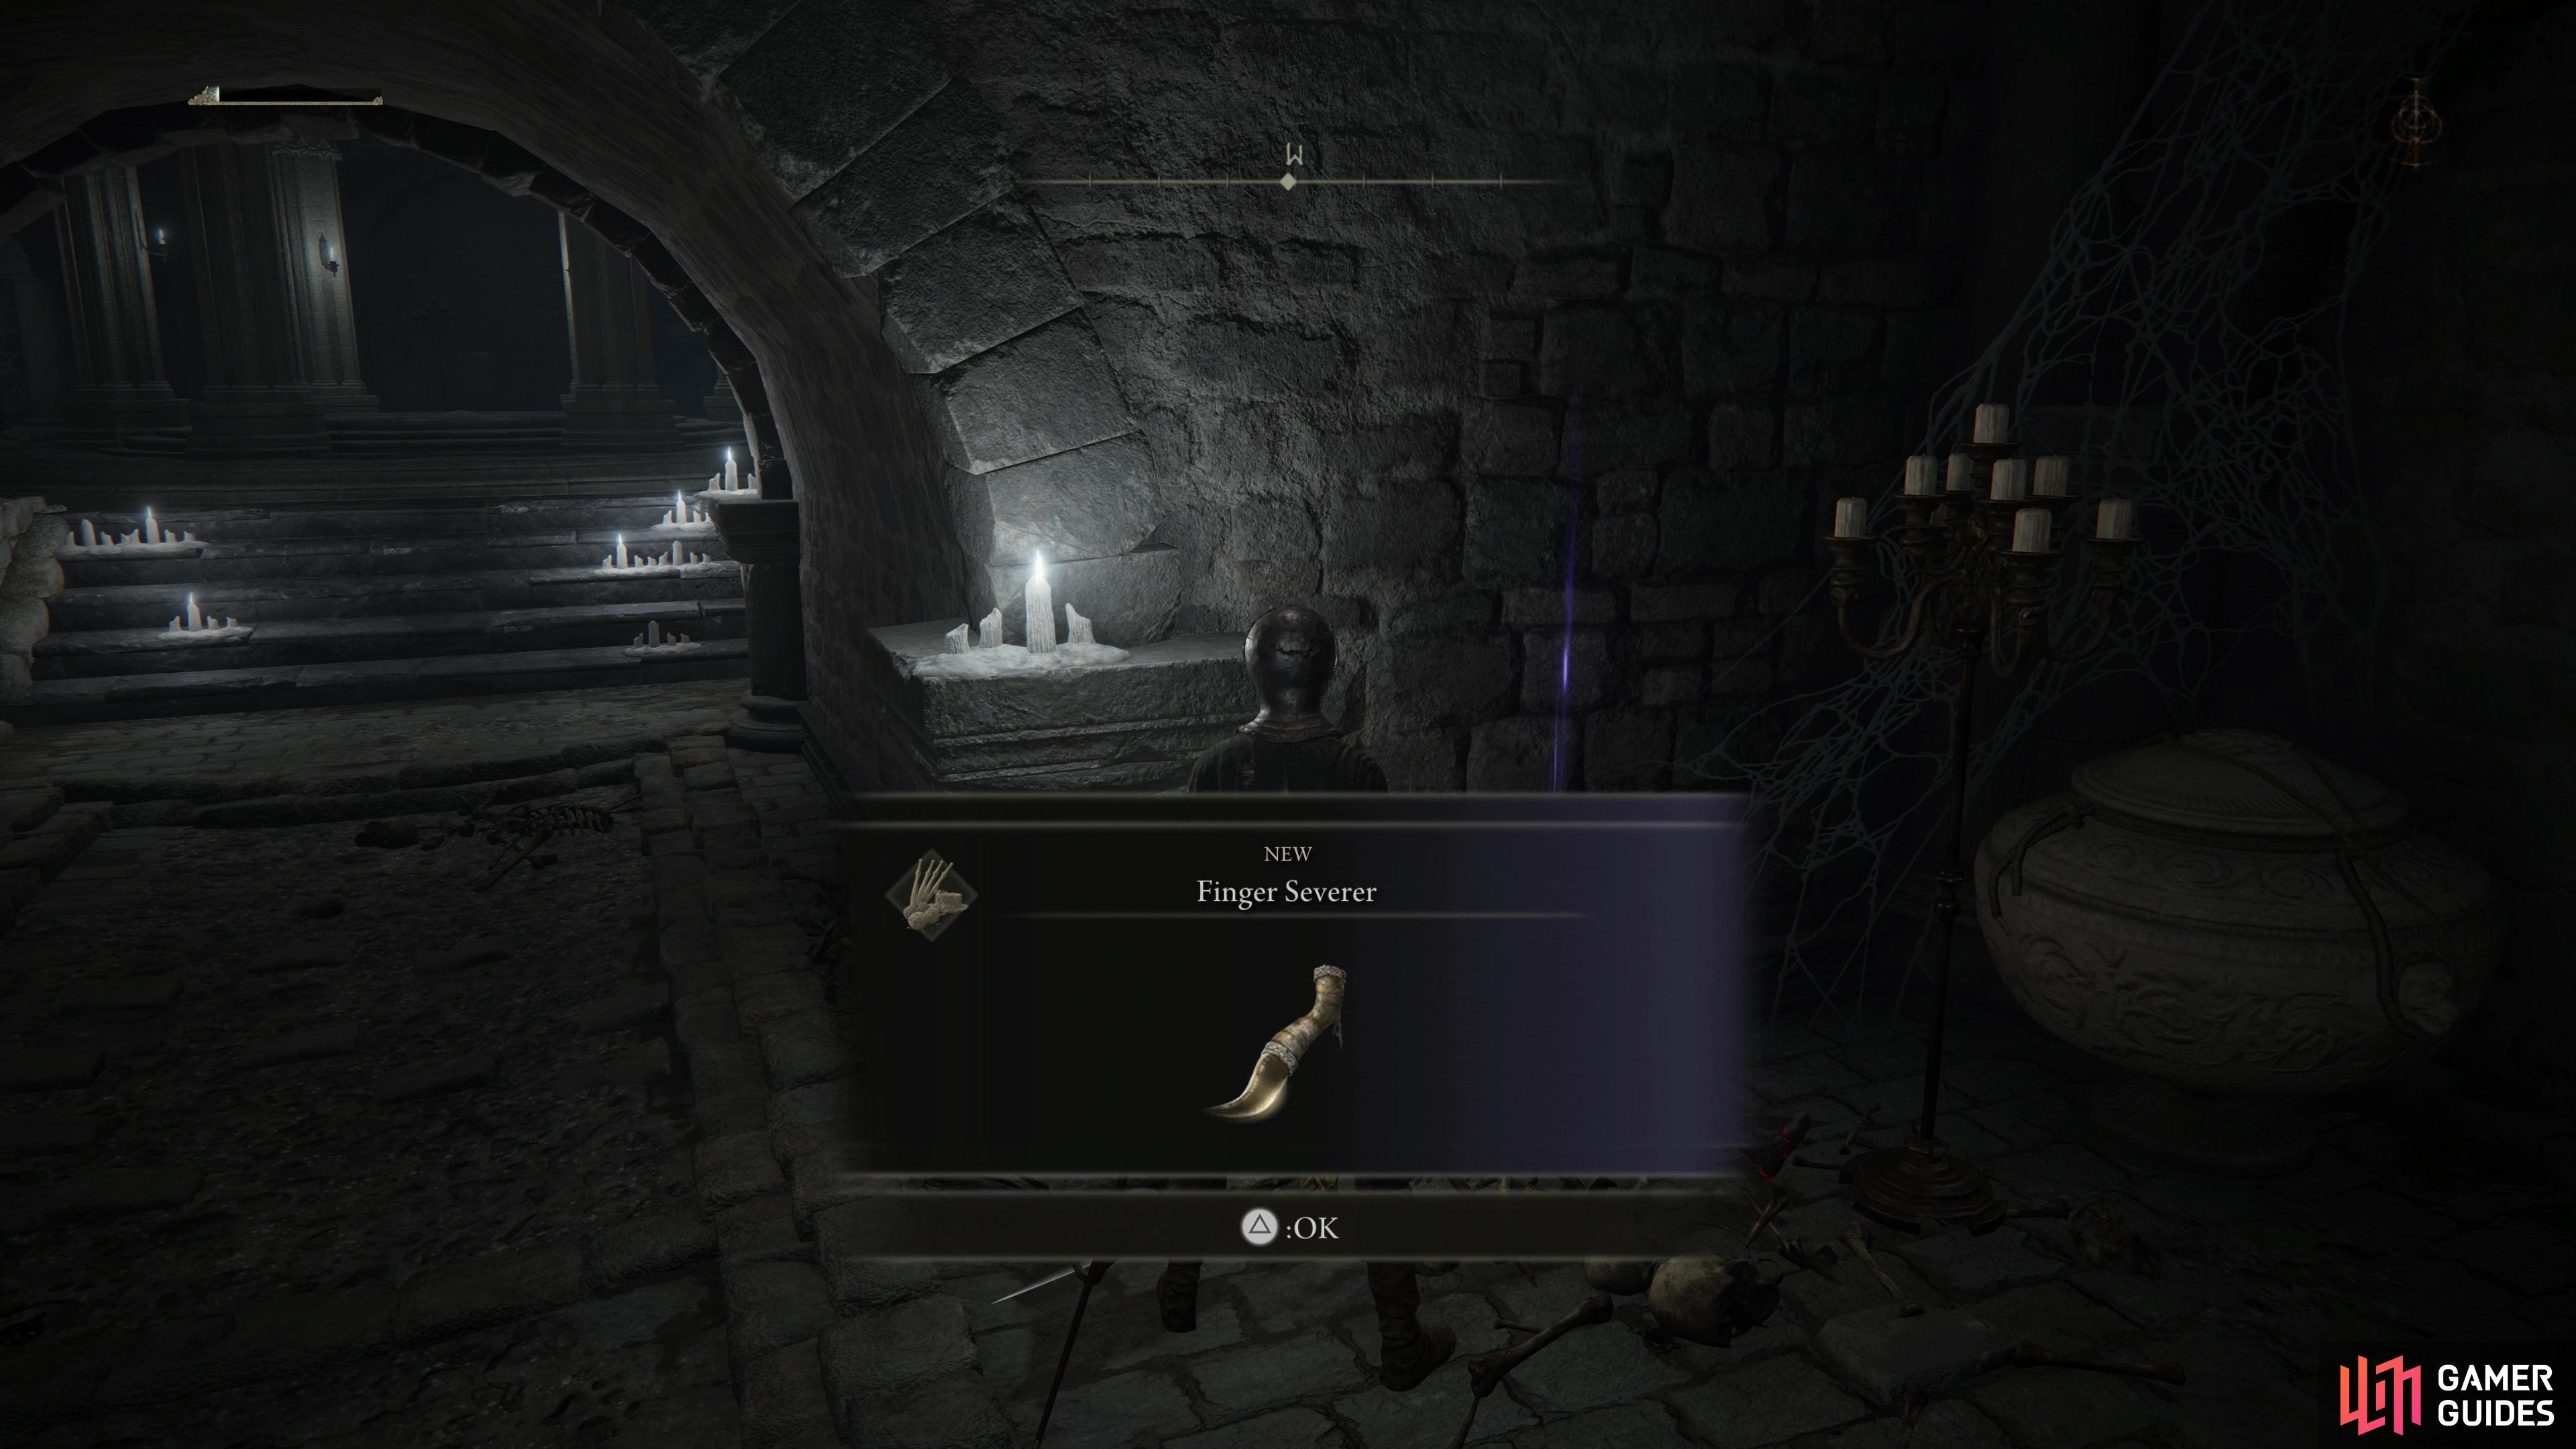 Leave the tutorial area and grab the Tarnished’s Furled Finger and the Finger Serverer items.